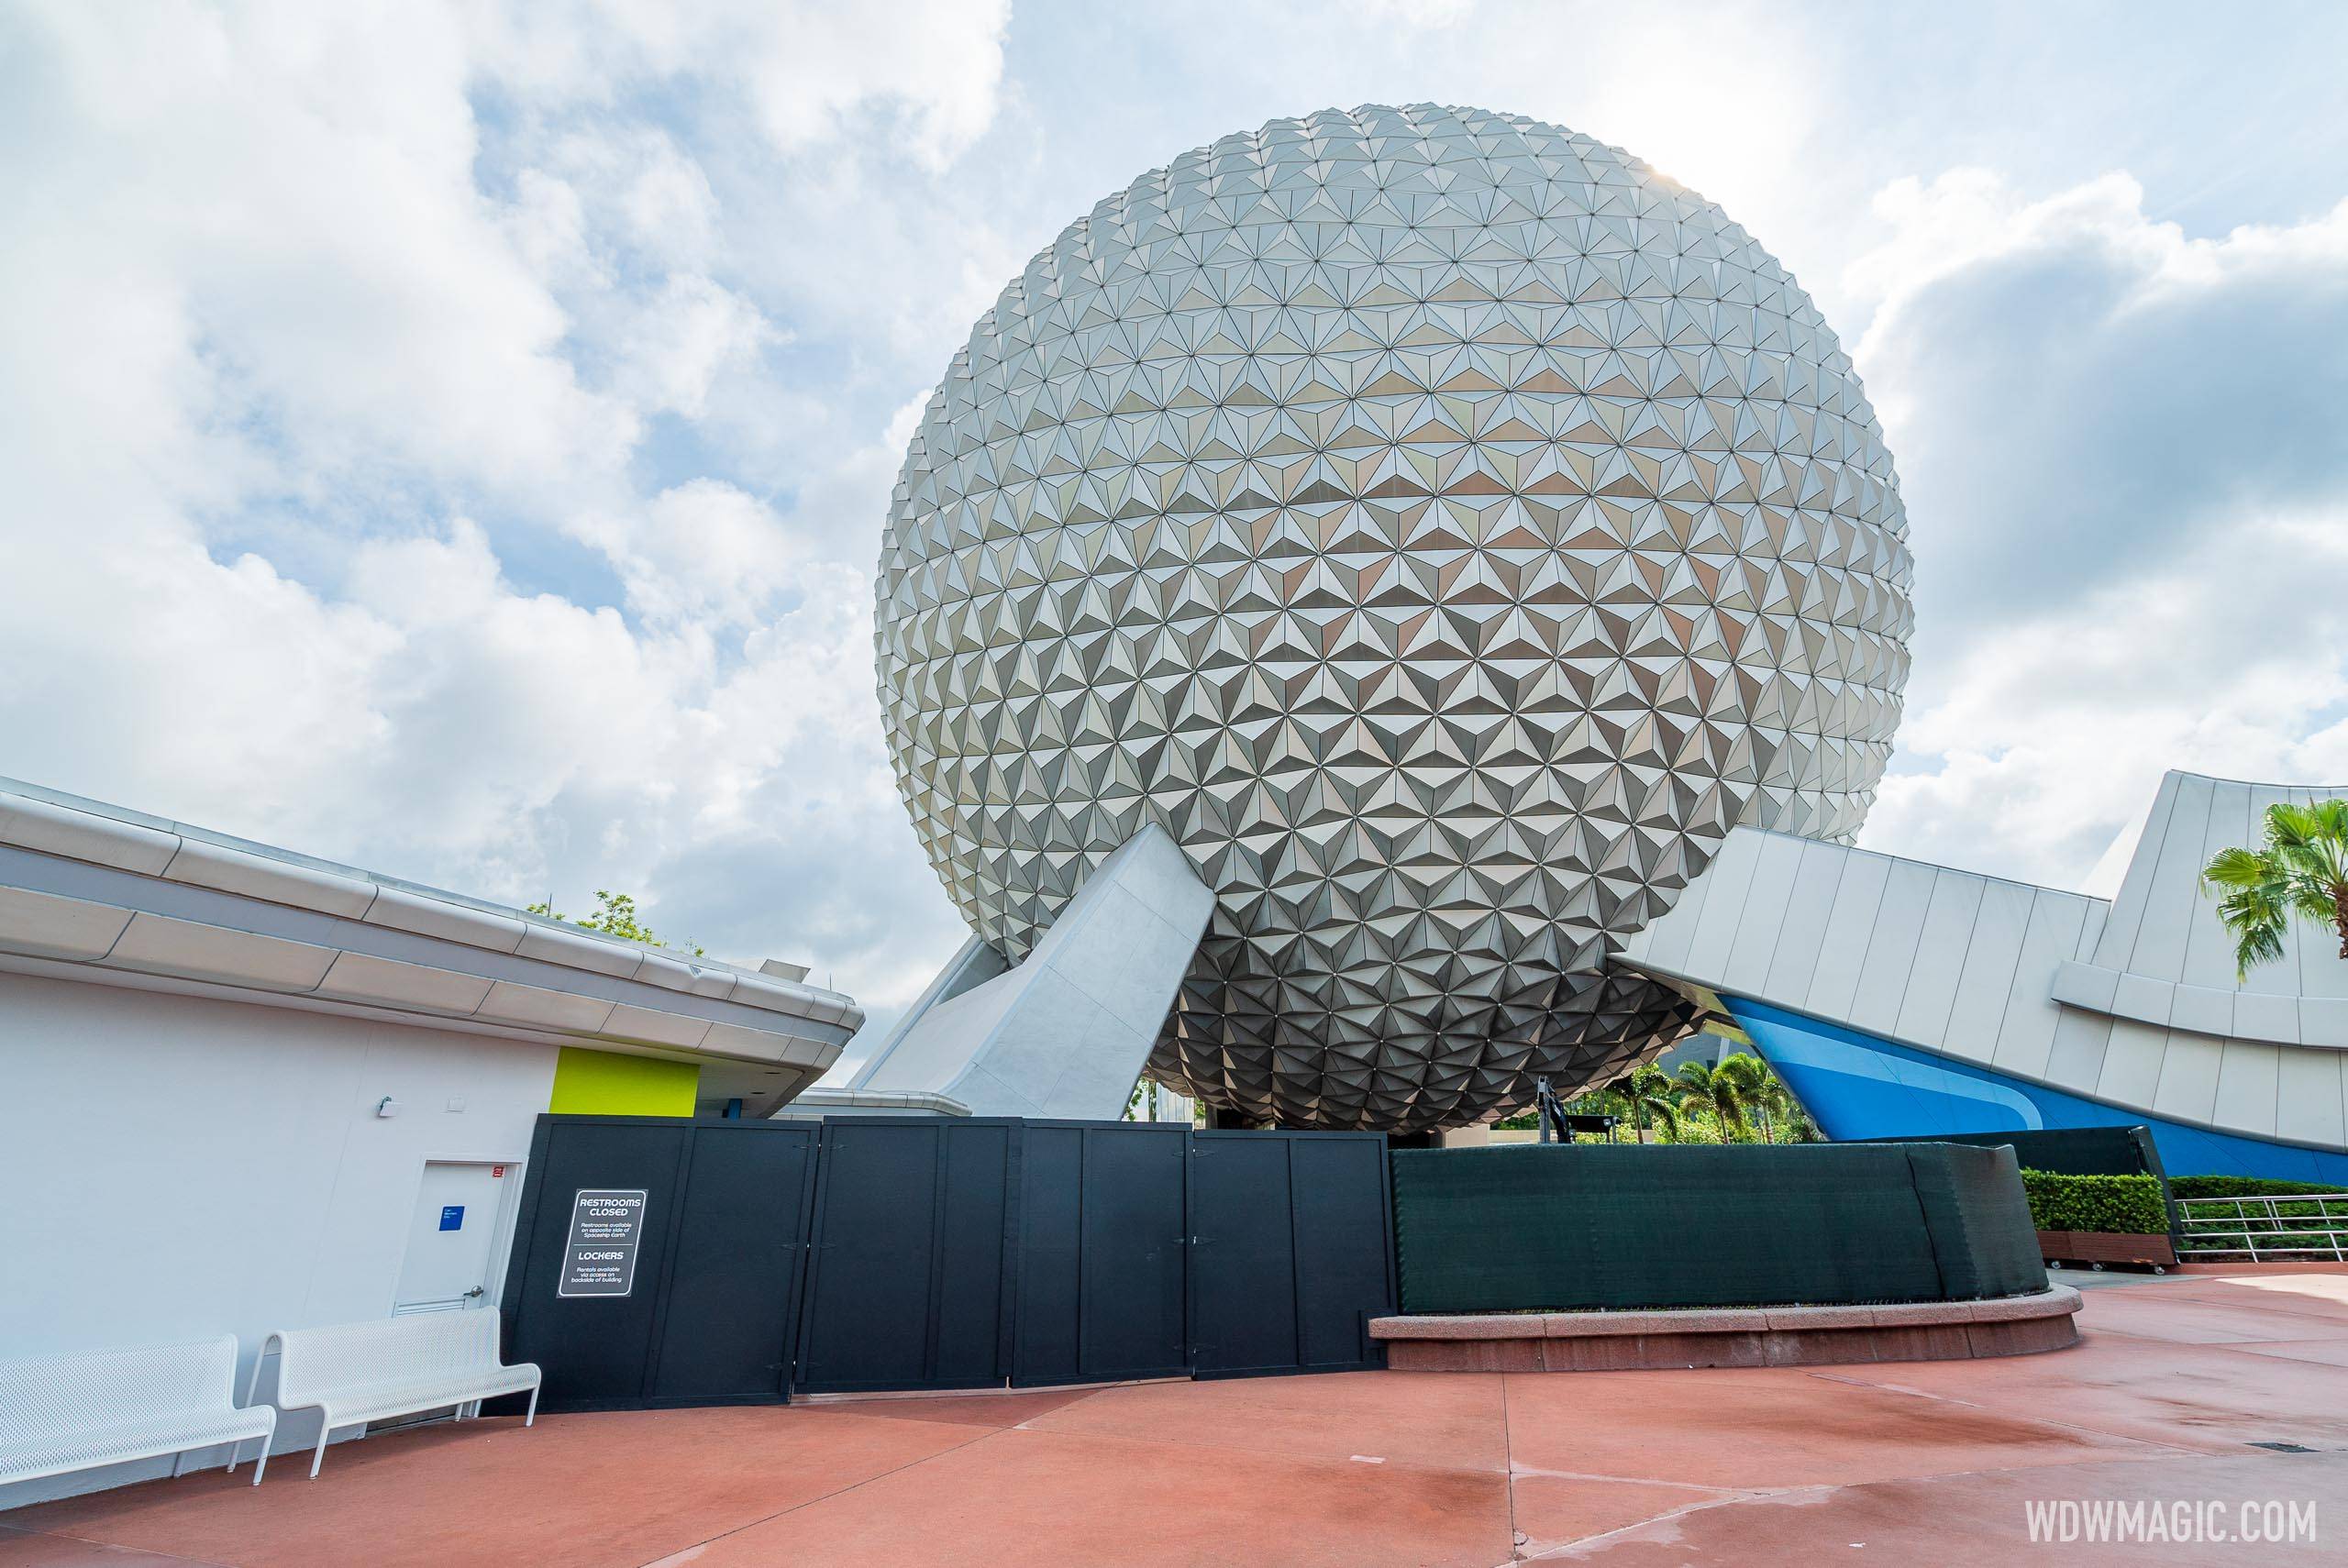 Spaceship Earth West restrooms closed for refurbishment